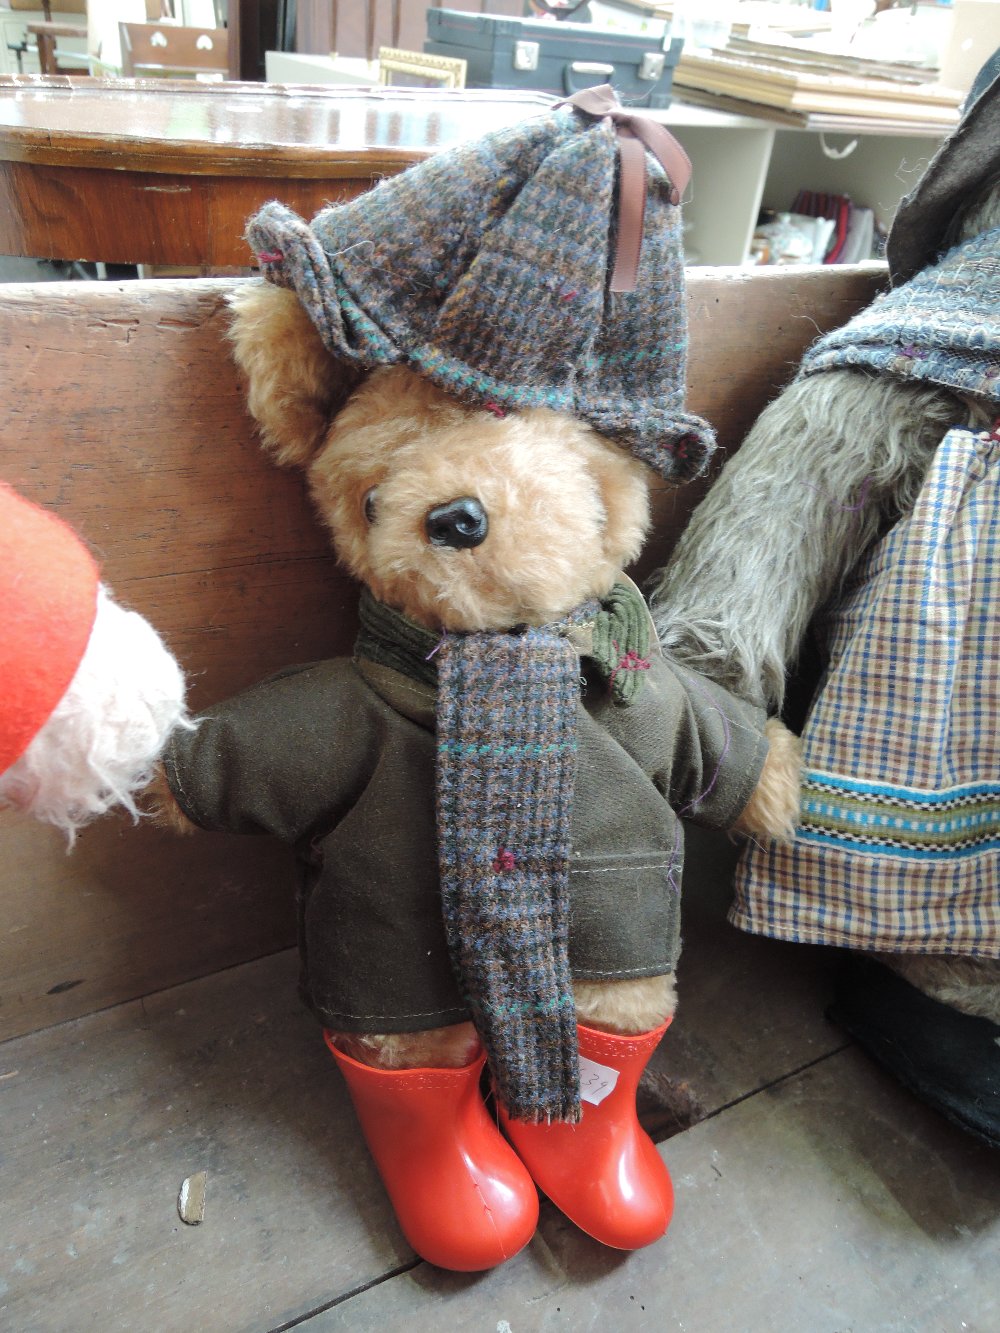 A Laura Grant bear wearing jacket, hat, scarf and wellingtons